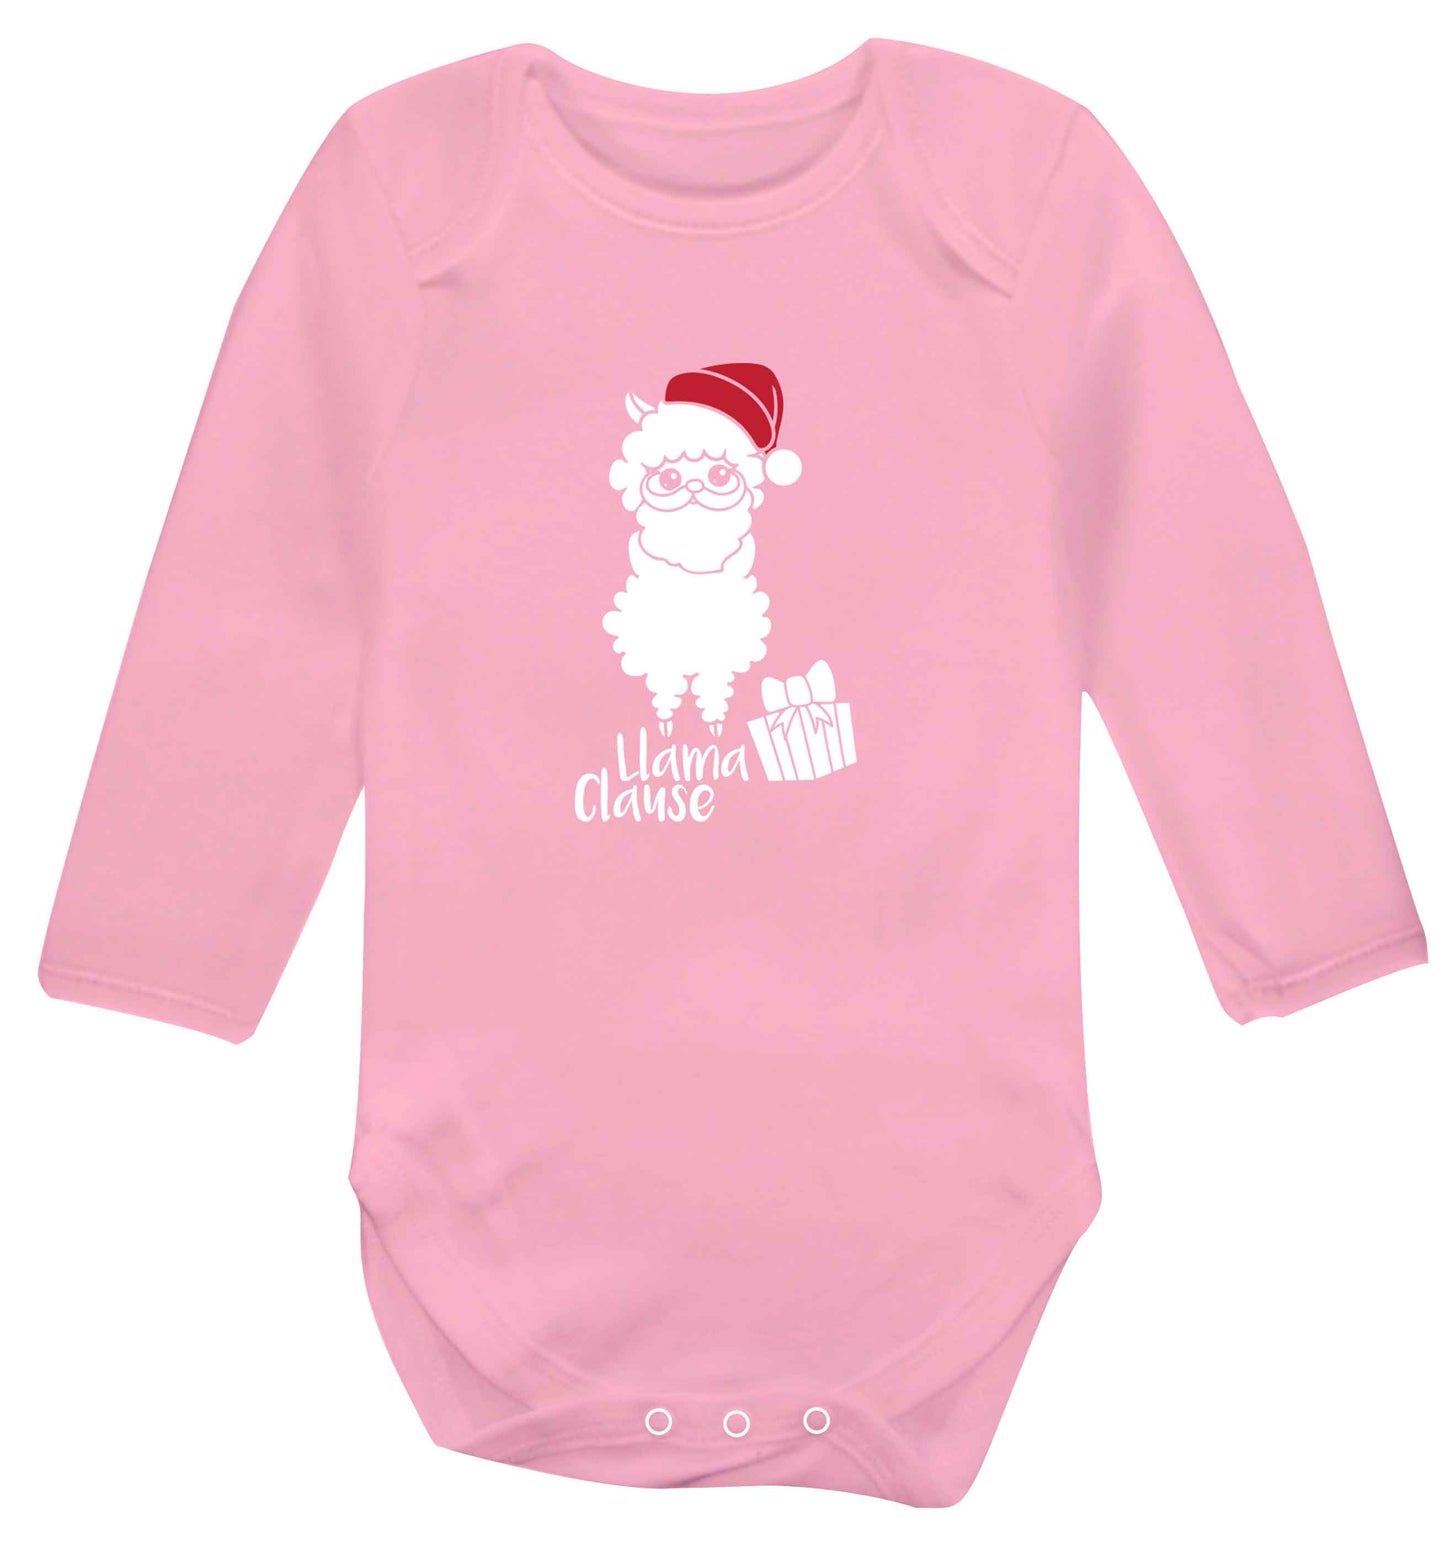 Llama Clause baby vest long sleeved pale pink 6-12 months